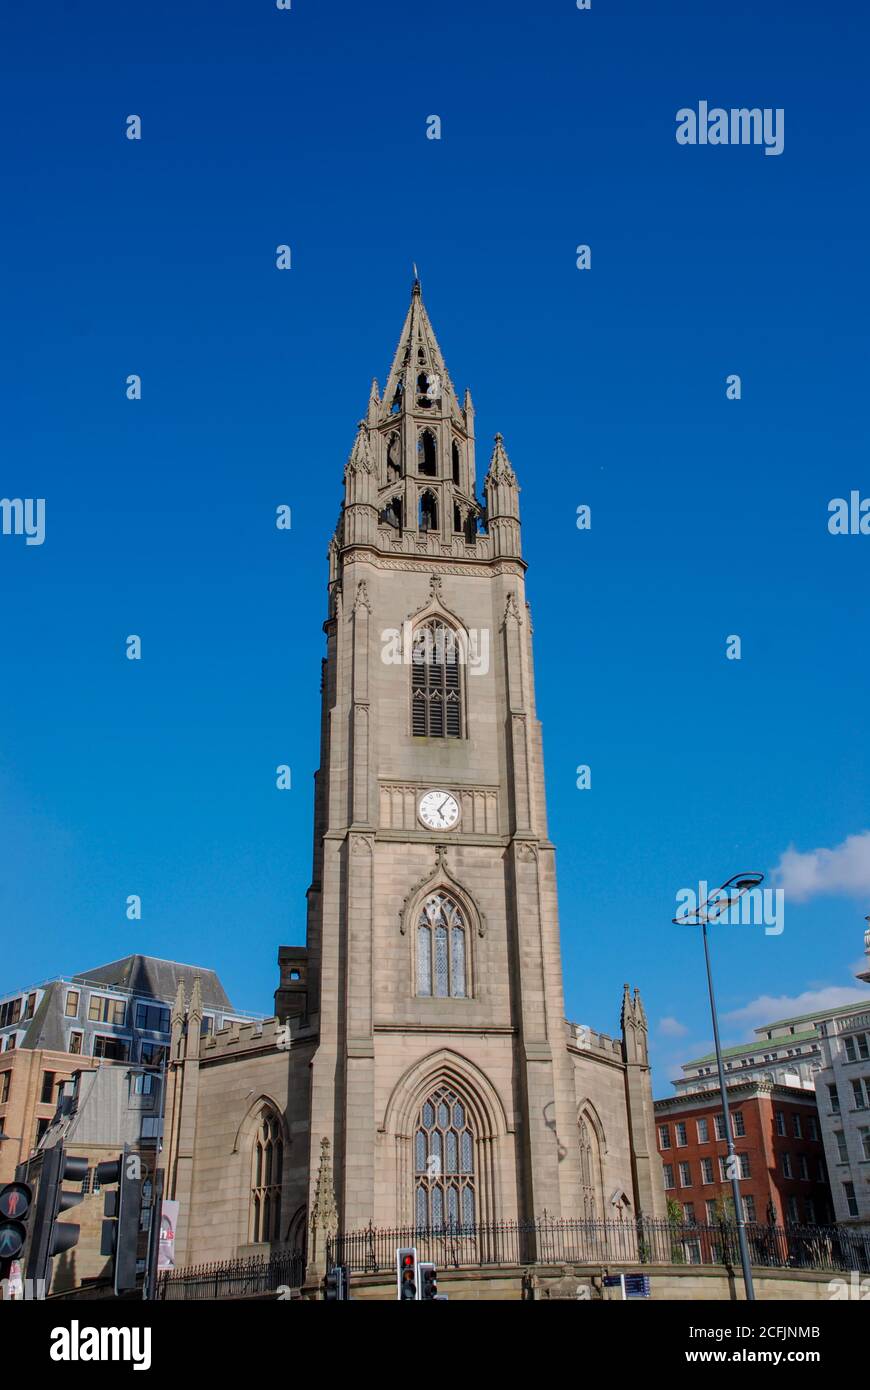 Parish Church of Our Lady and St Nicholas near the waterfront in Liverpool, UK Stock Photo